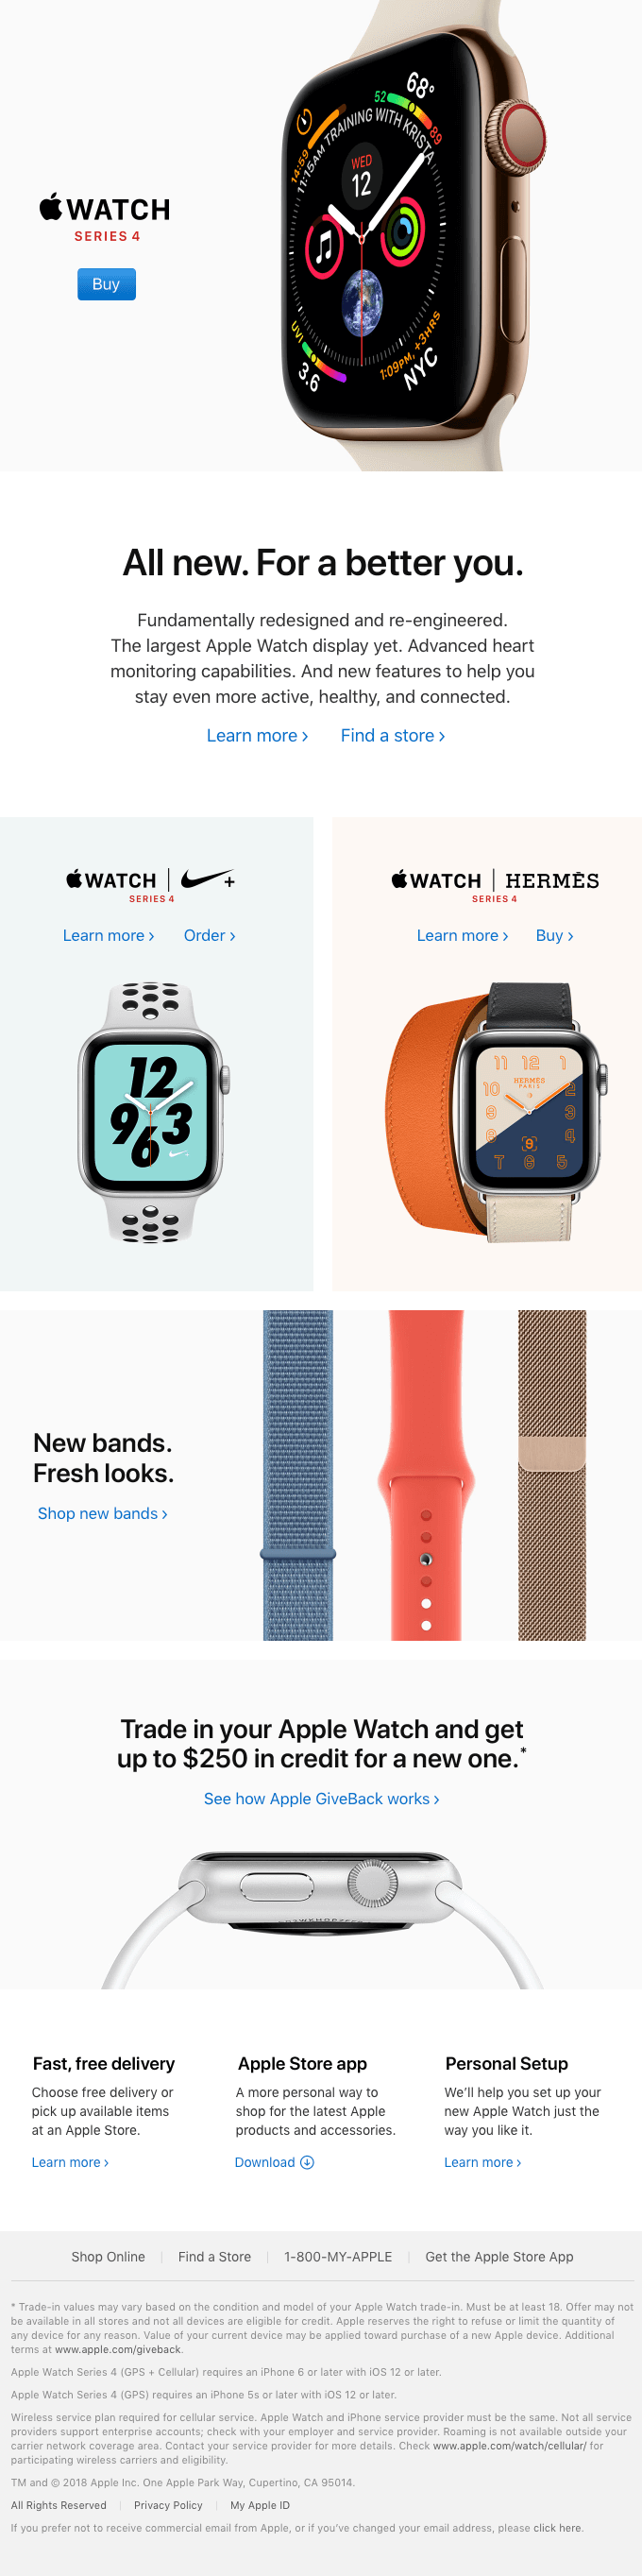 Apple Watch Series 4 email